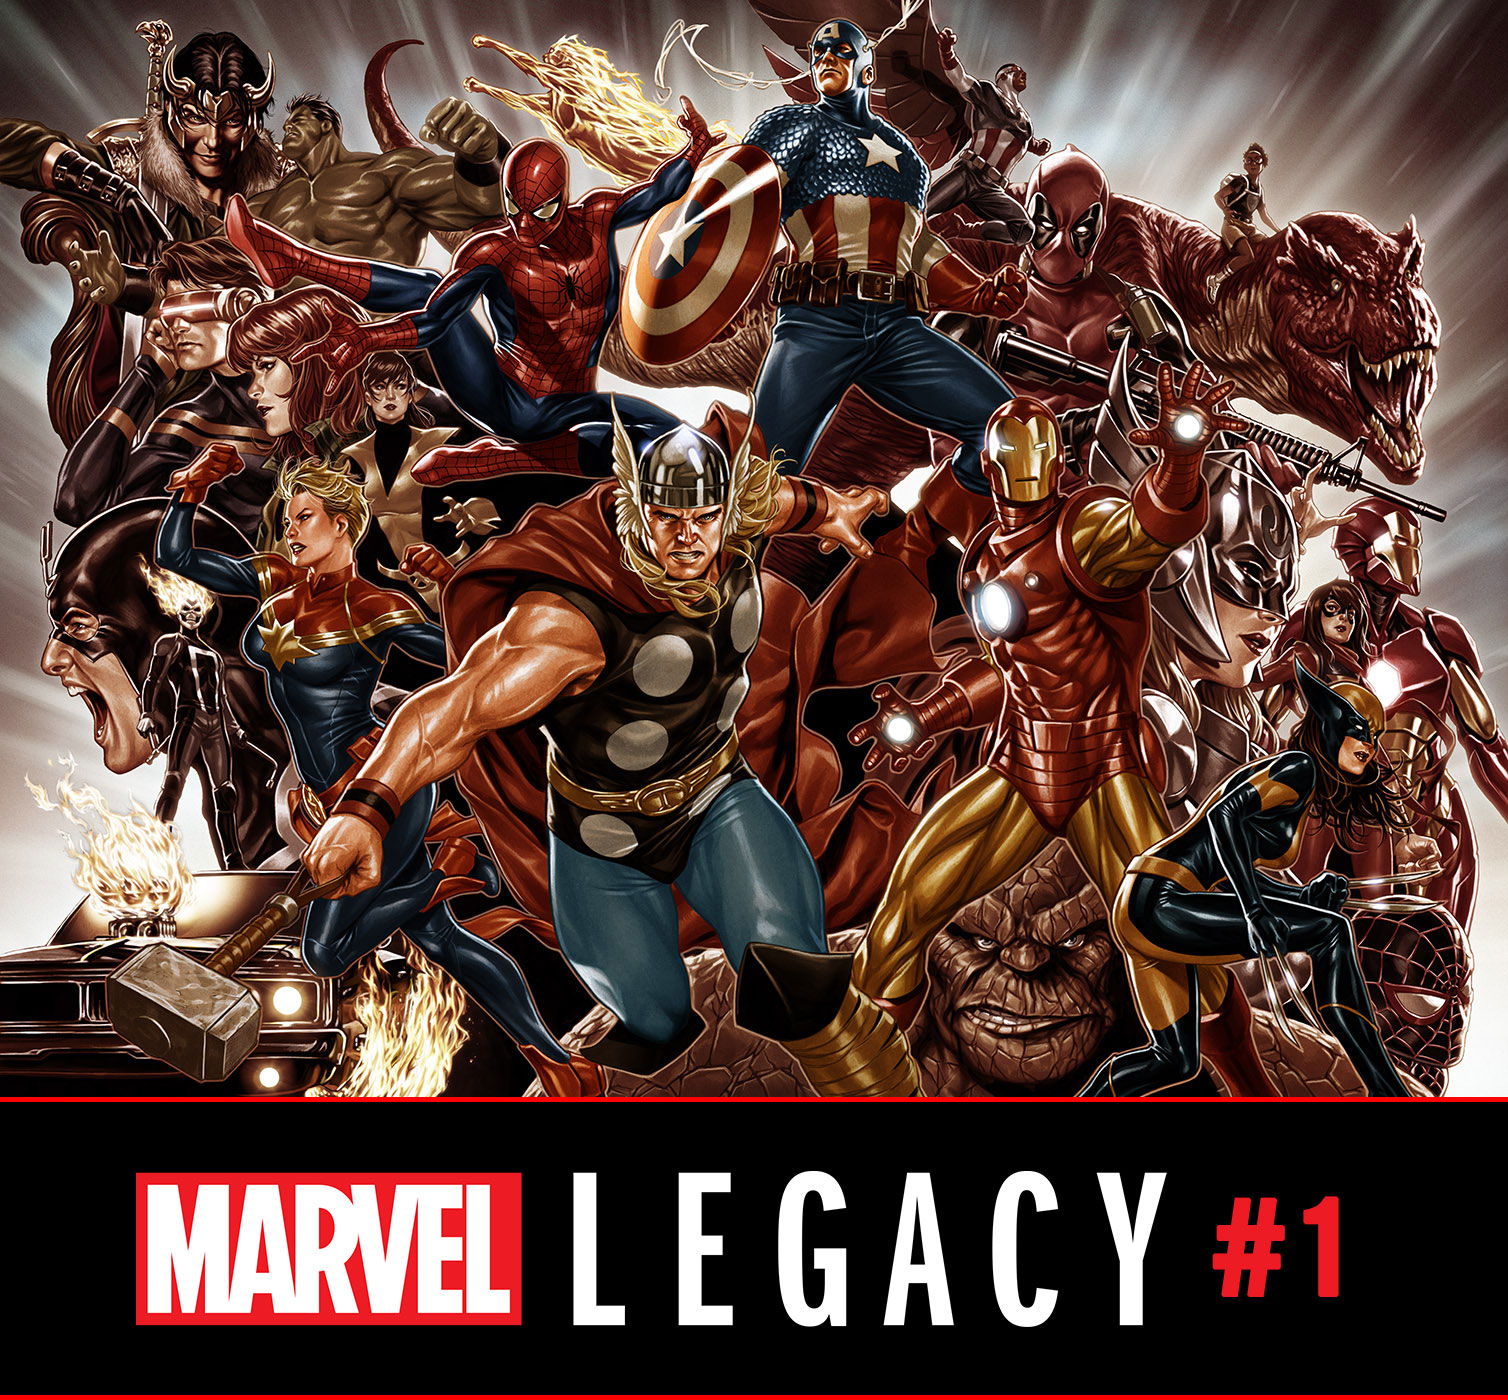 This September, MARVEL LEGACY Changes the Comic Book Industry!